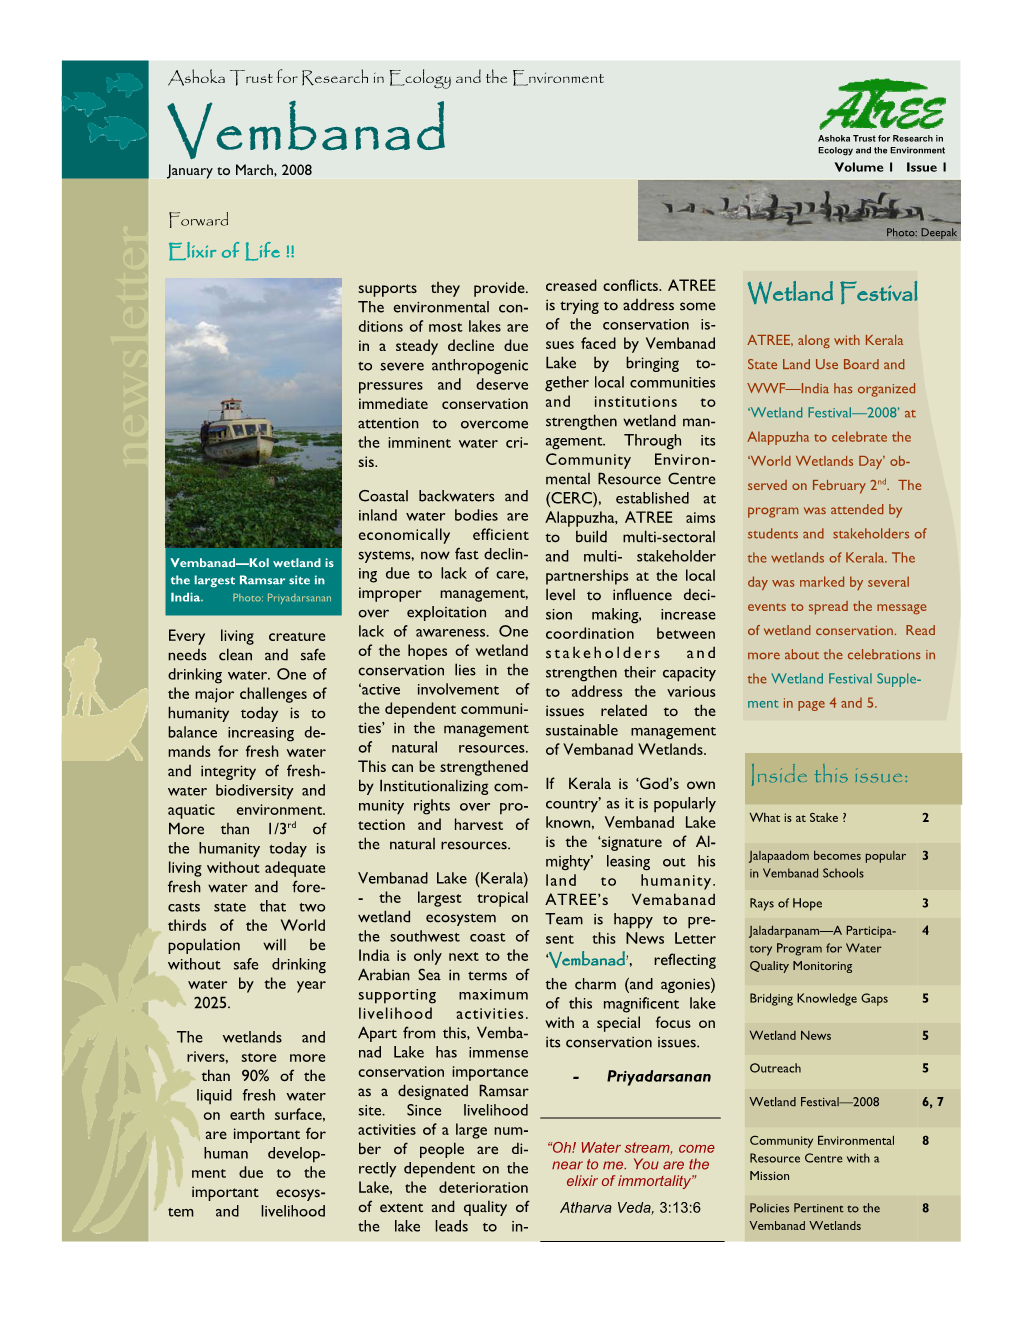 Inside This Issue: Wetland Festival